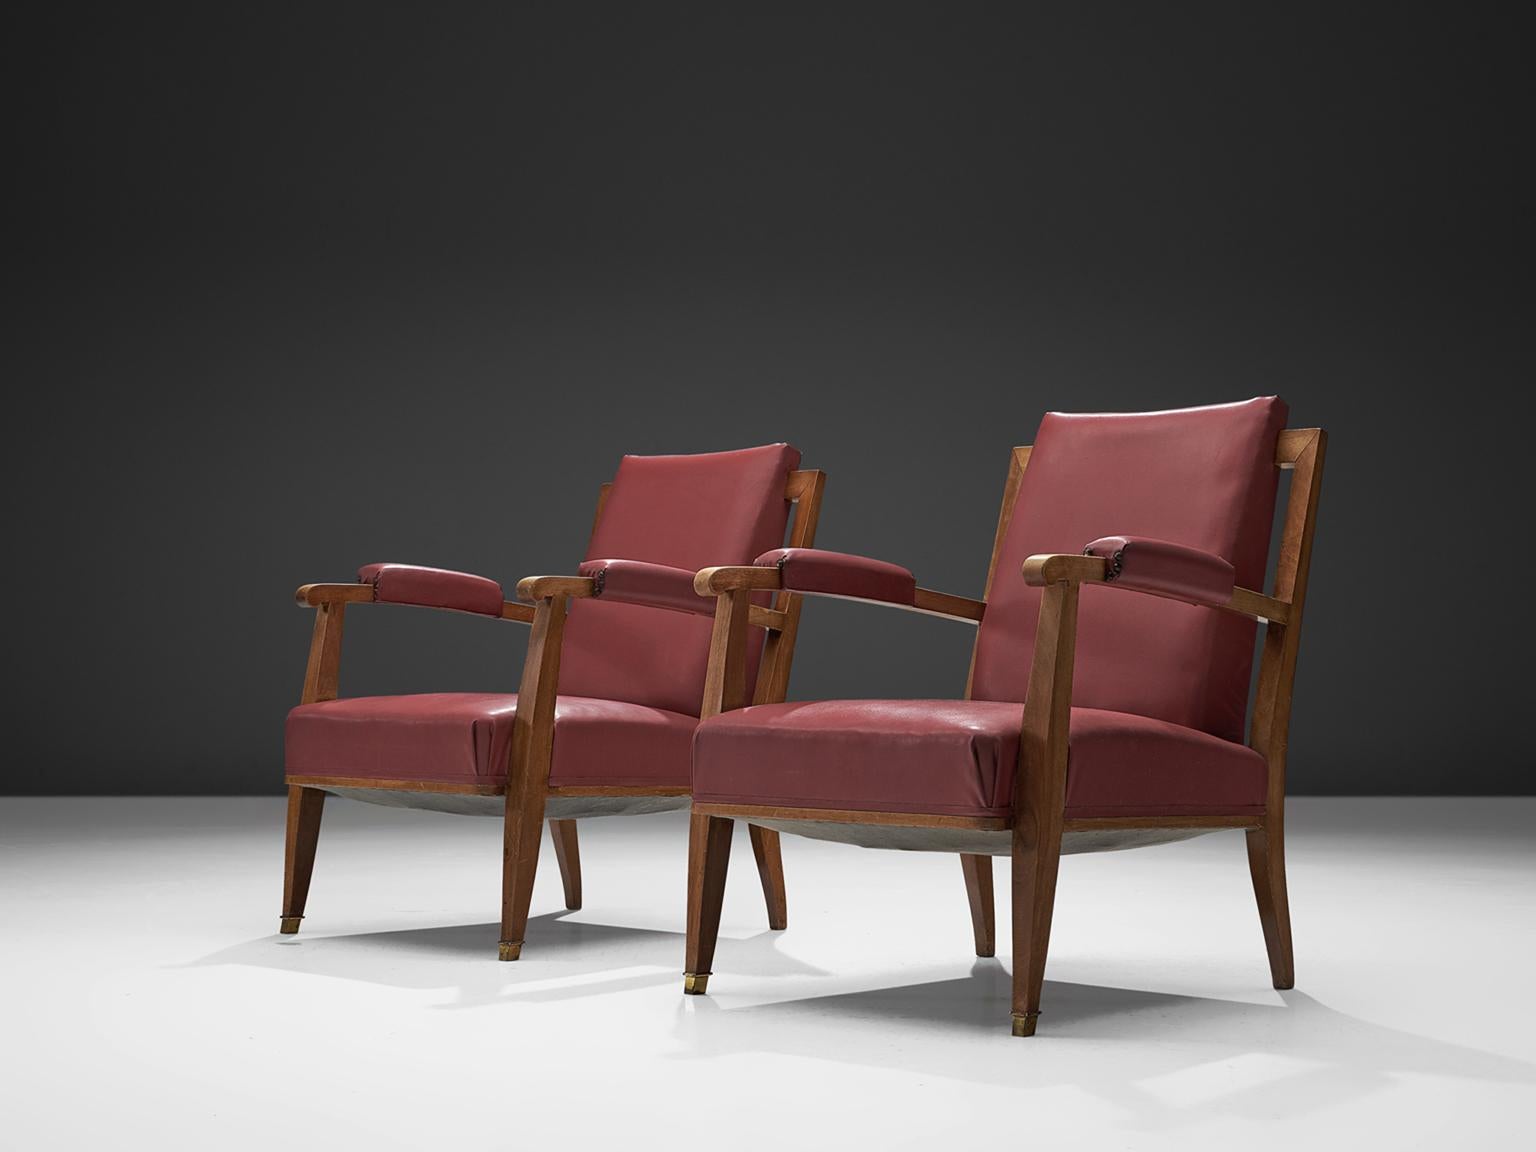 Jules Leleu, armchairs, pink leatherette, brass and stained beech, France, 1957

This set of two elegant armchairs in wood and pink-purple leatherette upholstery, and are made out of solid oak. The high tapered wooden legs provide an open look to